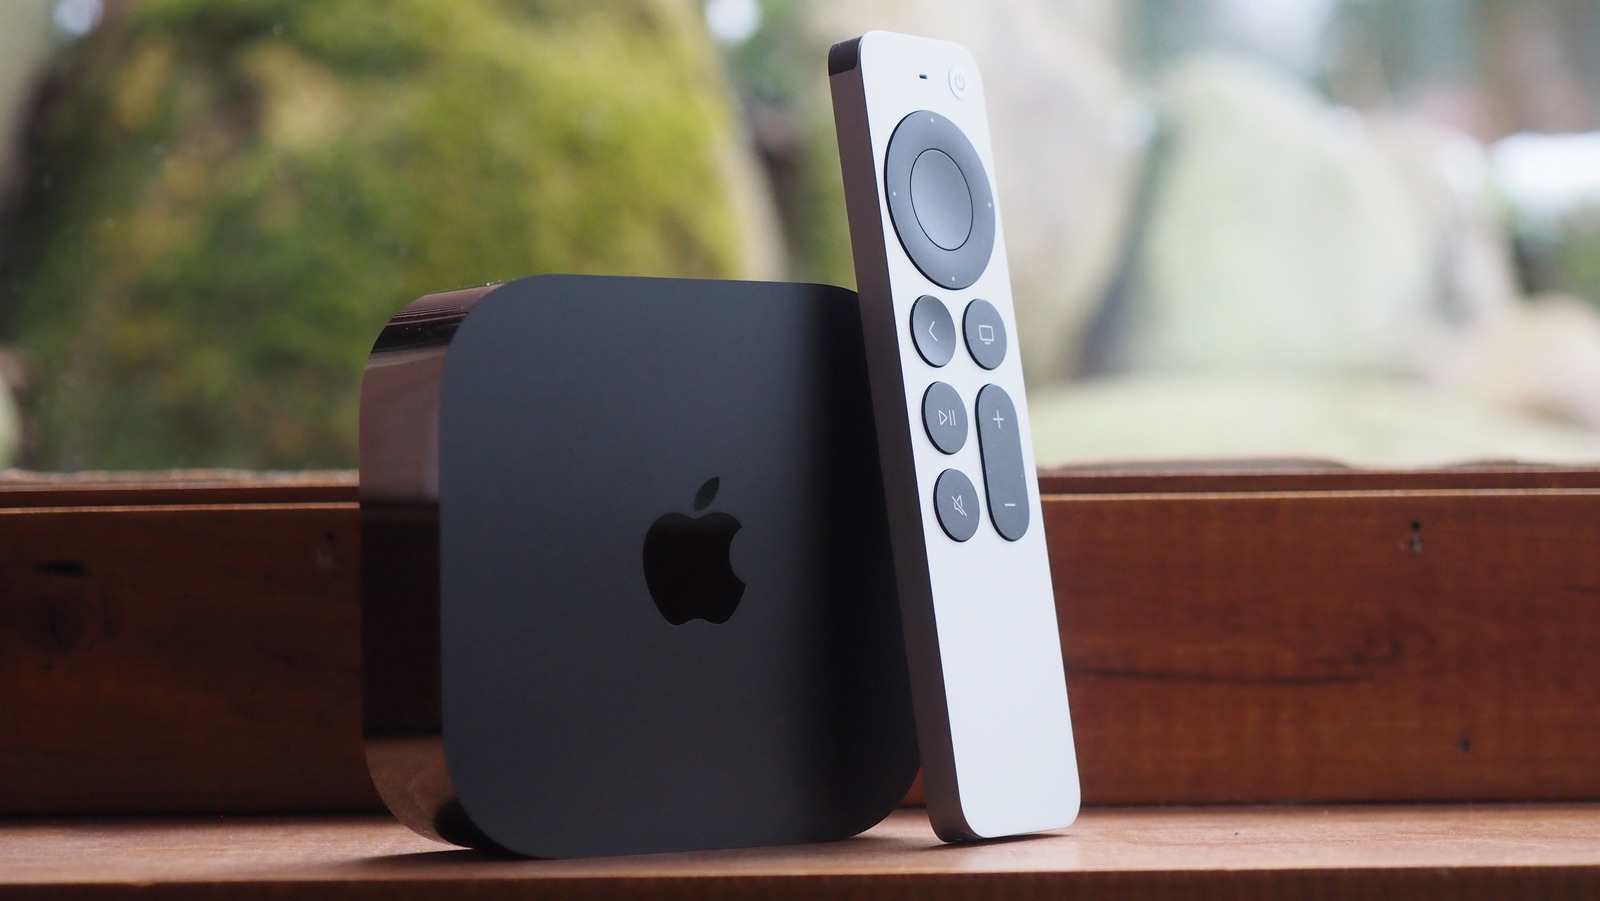 Apple TV 4K Review (3rd Generation): Why Paying More Is Worth It